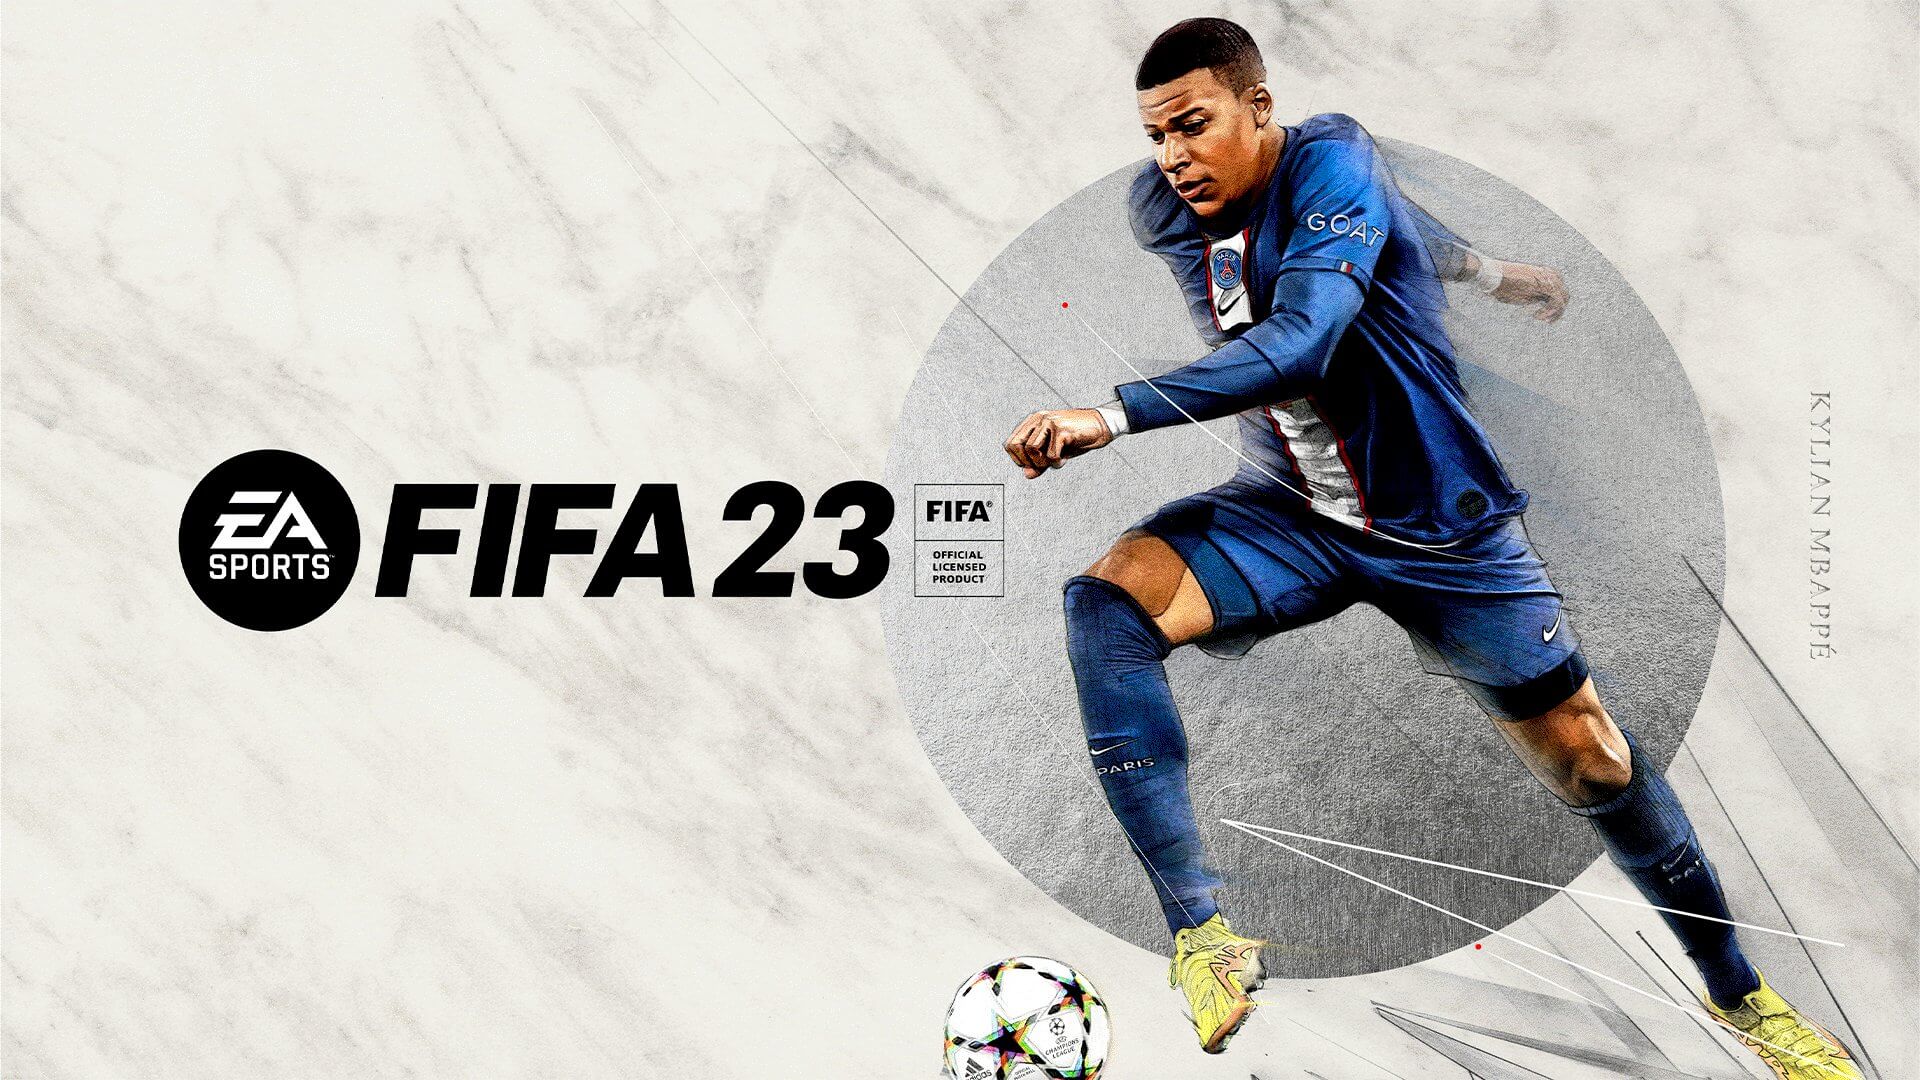 Video: FIFA 23 matchday video